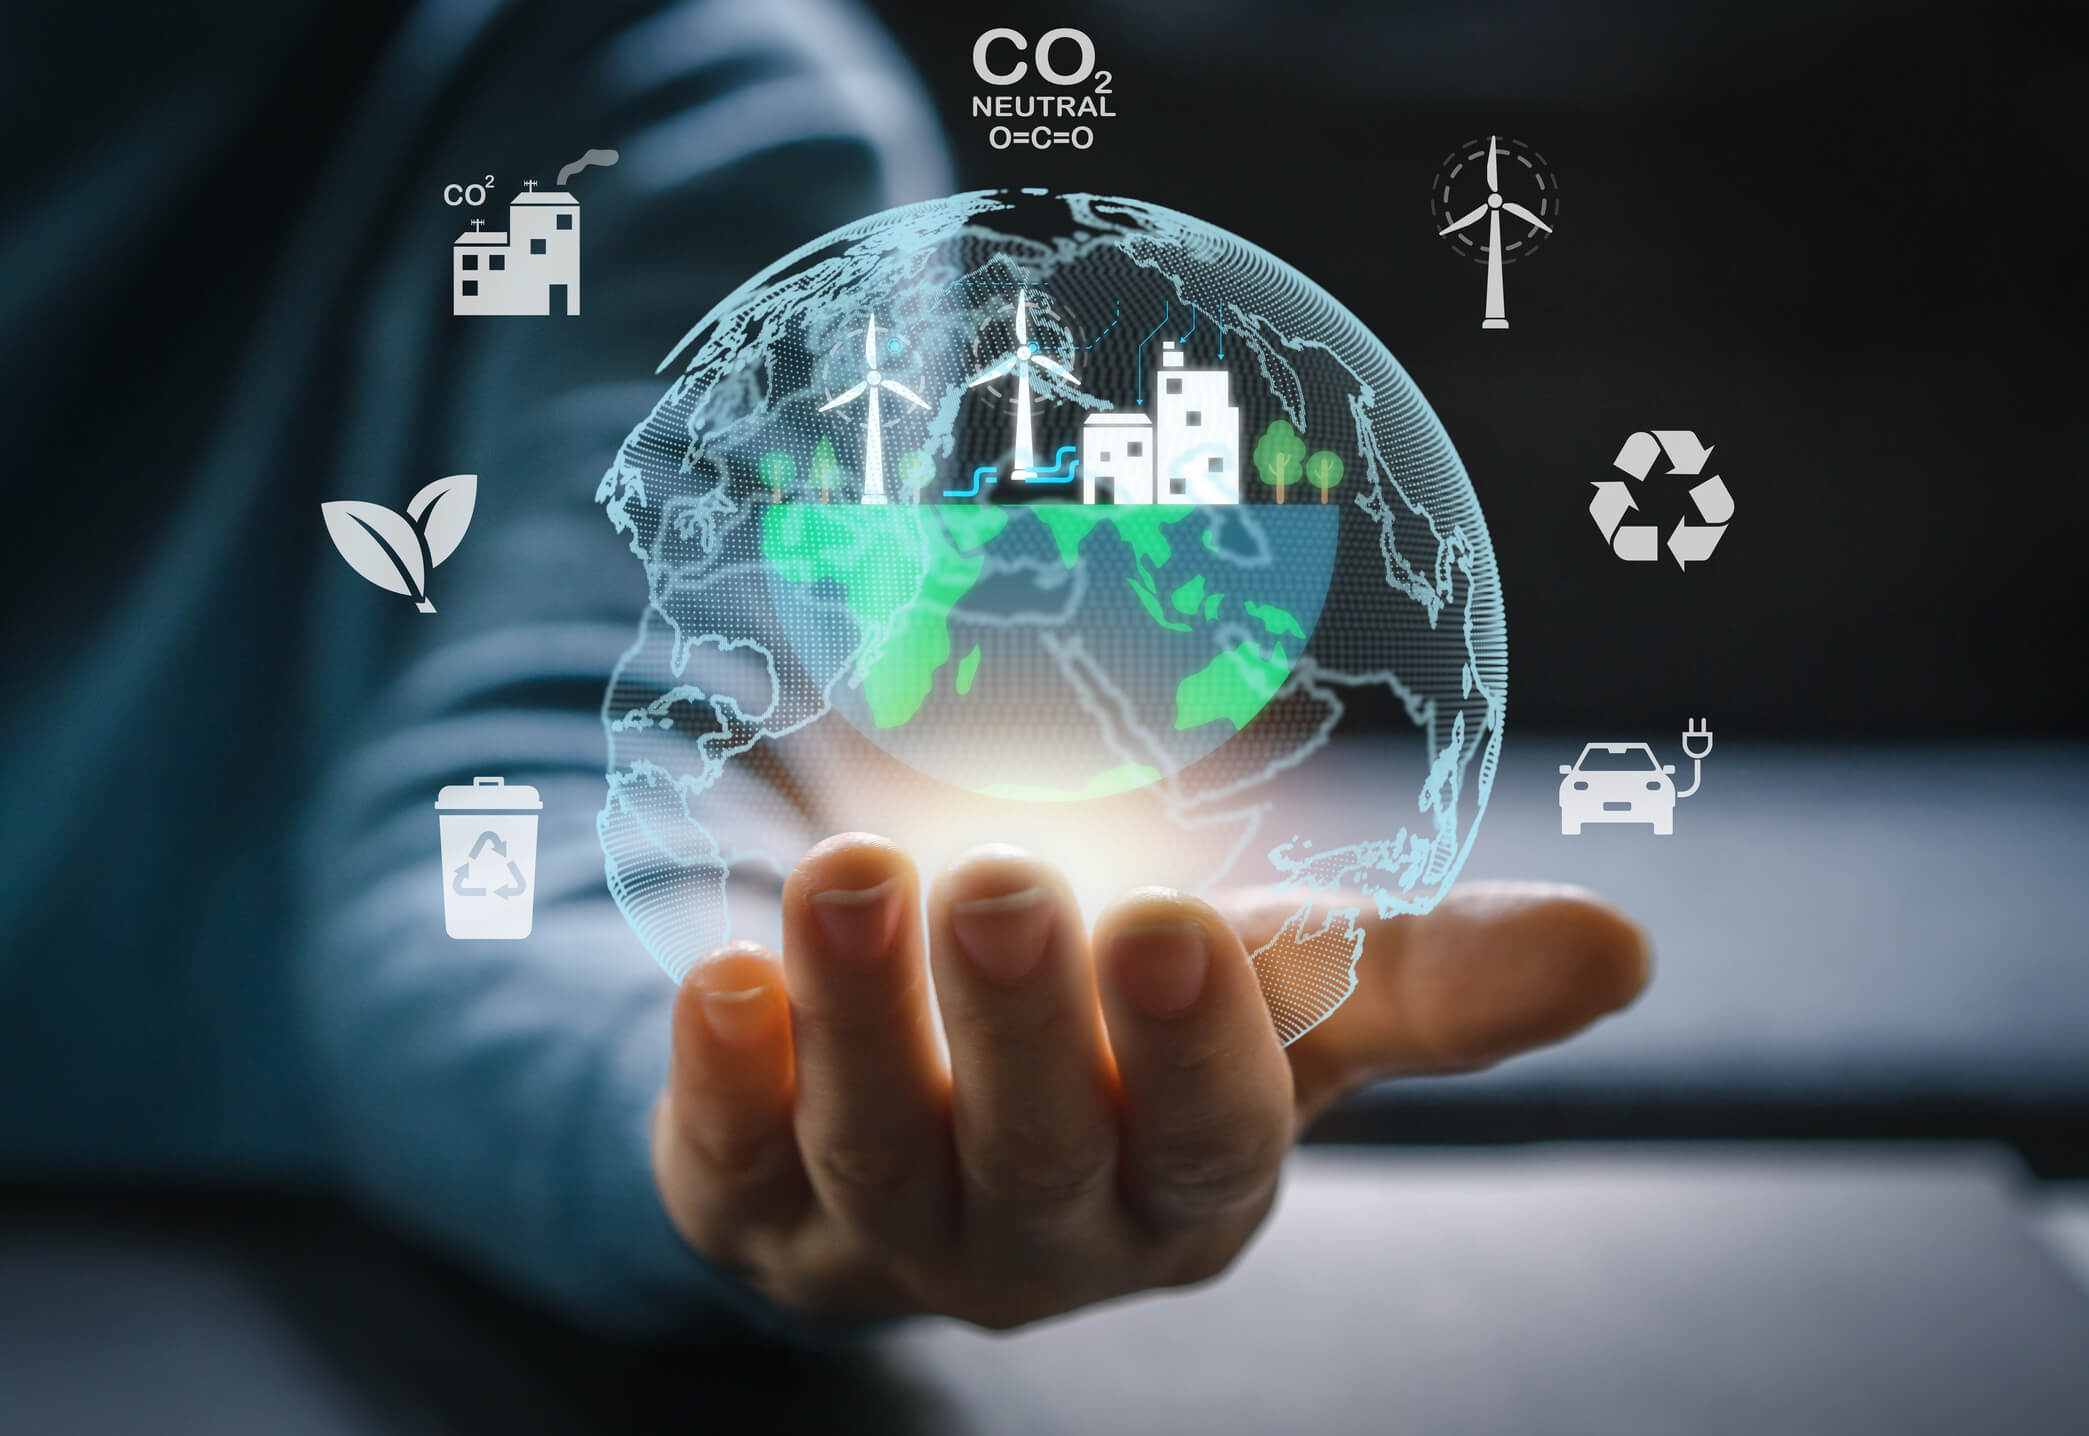 Industries can be Eco-Friendly - Complete Controller